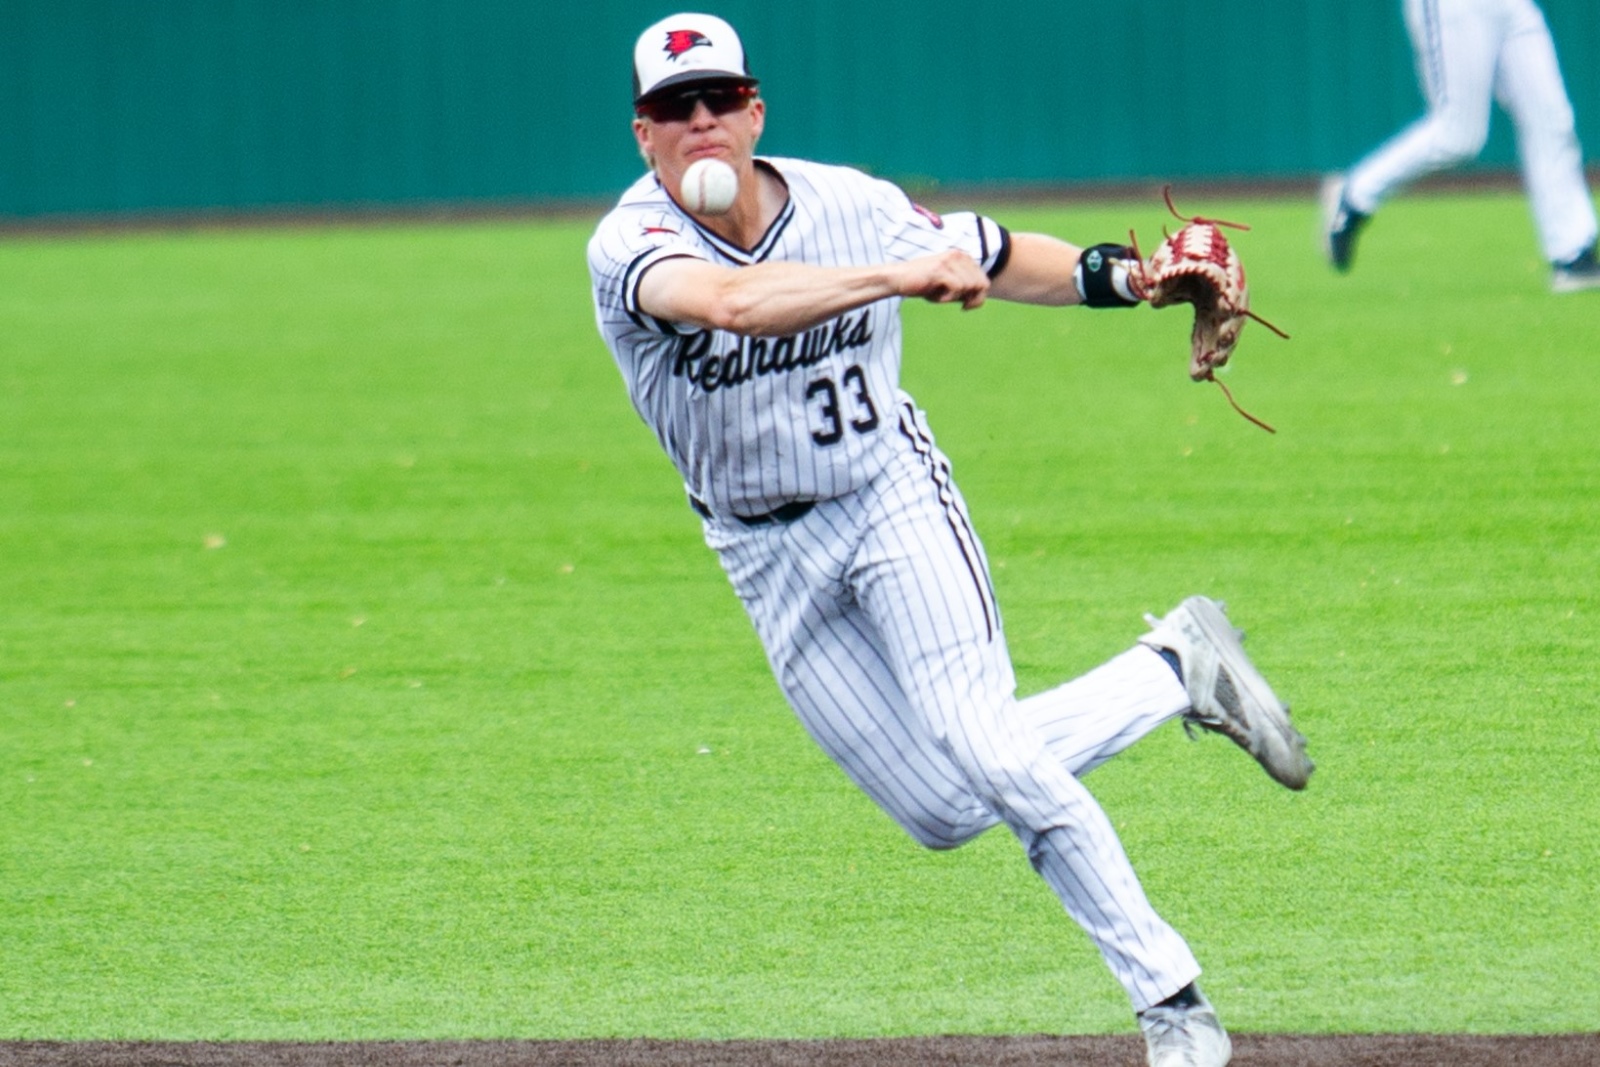 Brooks Kettering, wearing a Southeast Missouri State baseball uniform, throws the ball across the infield during a game.